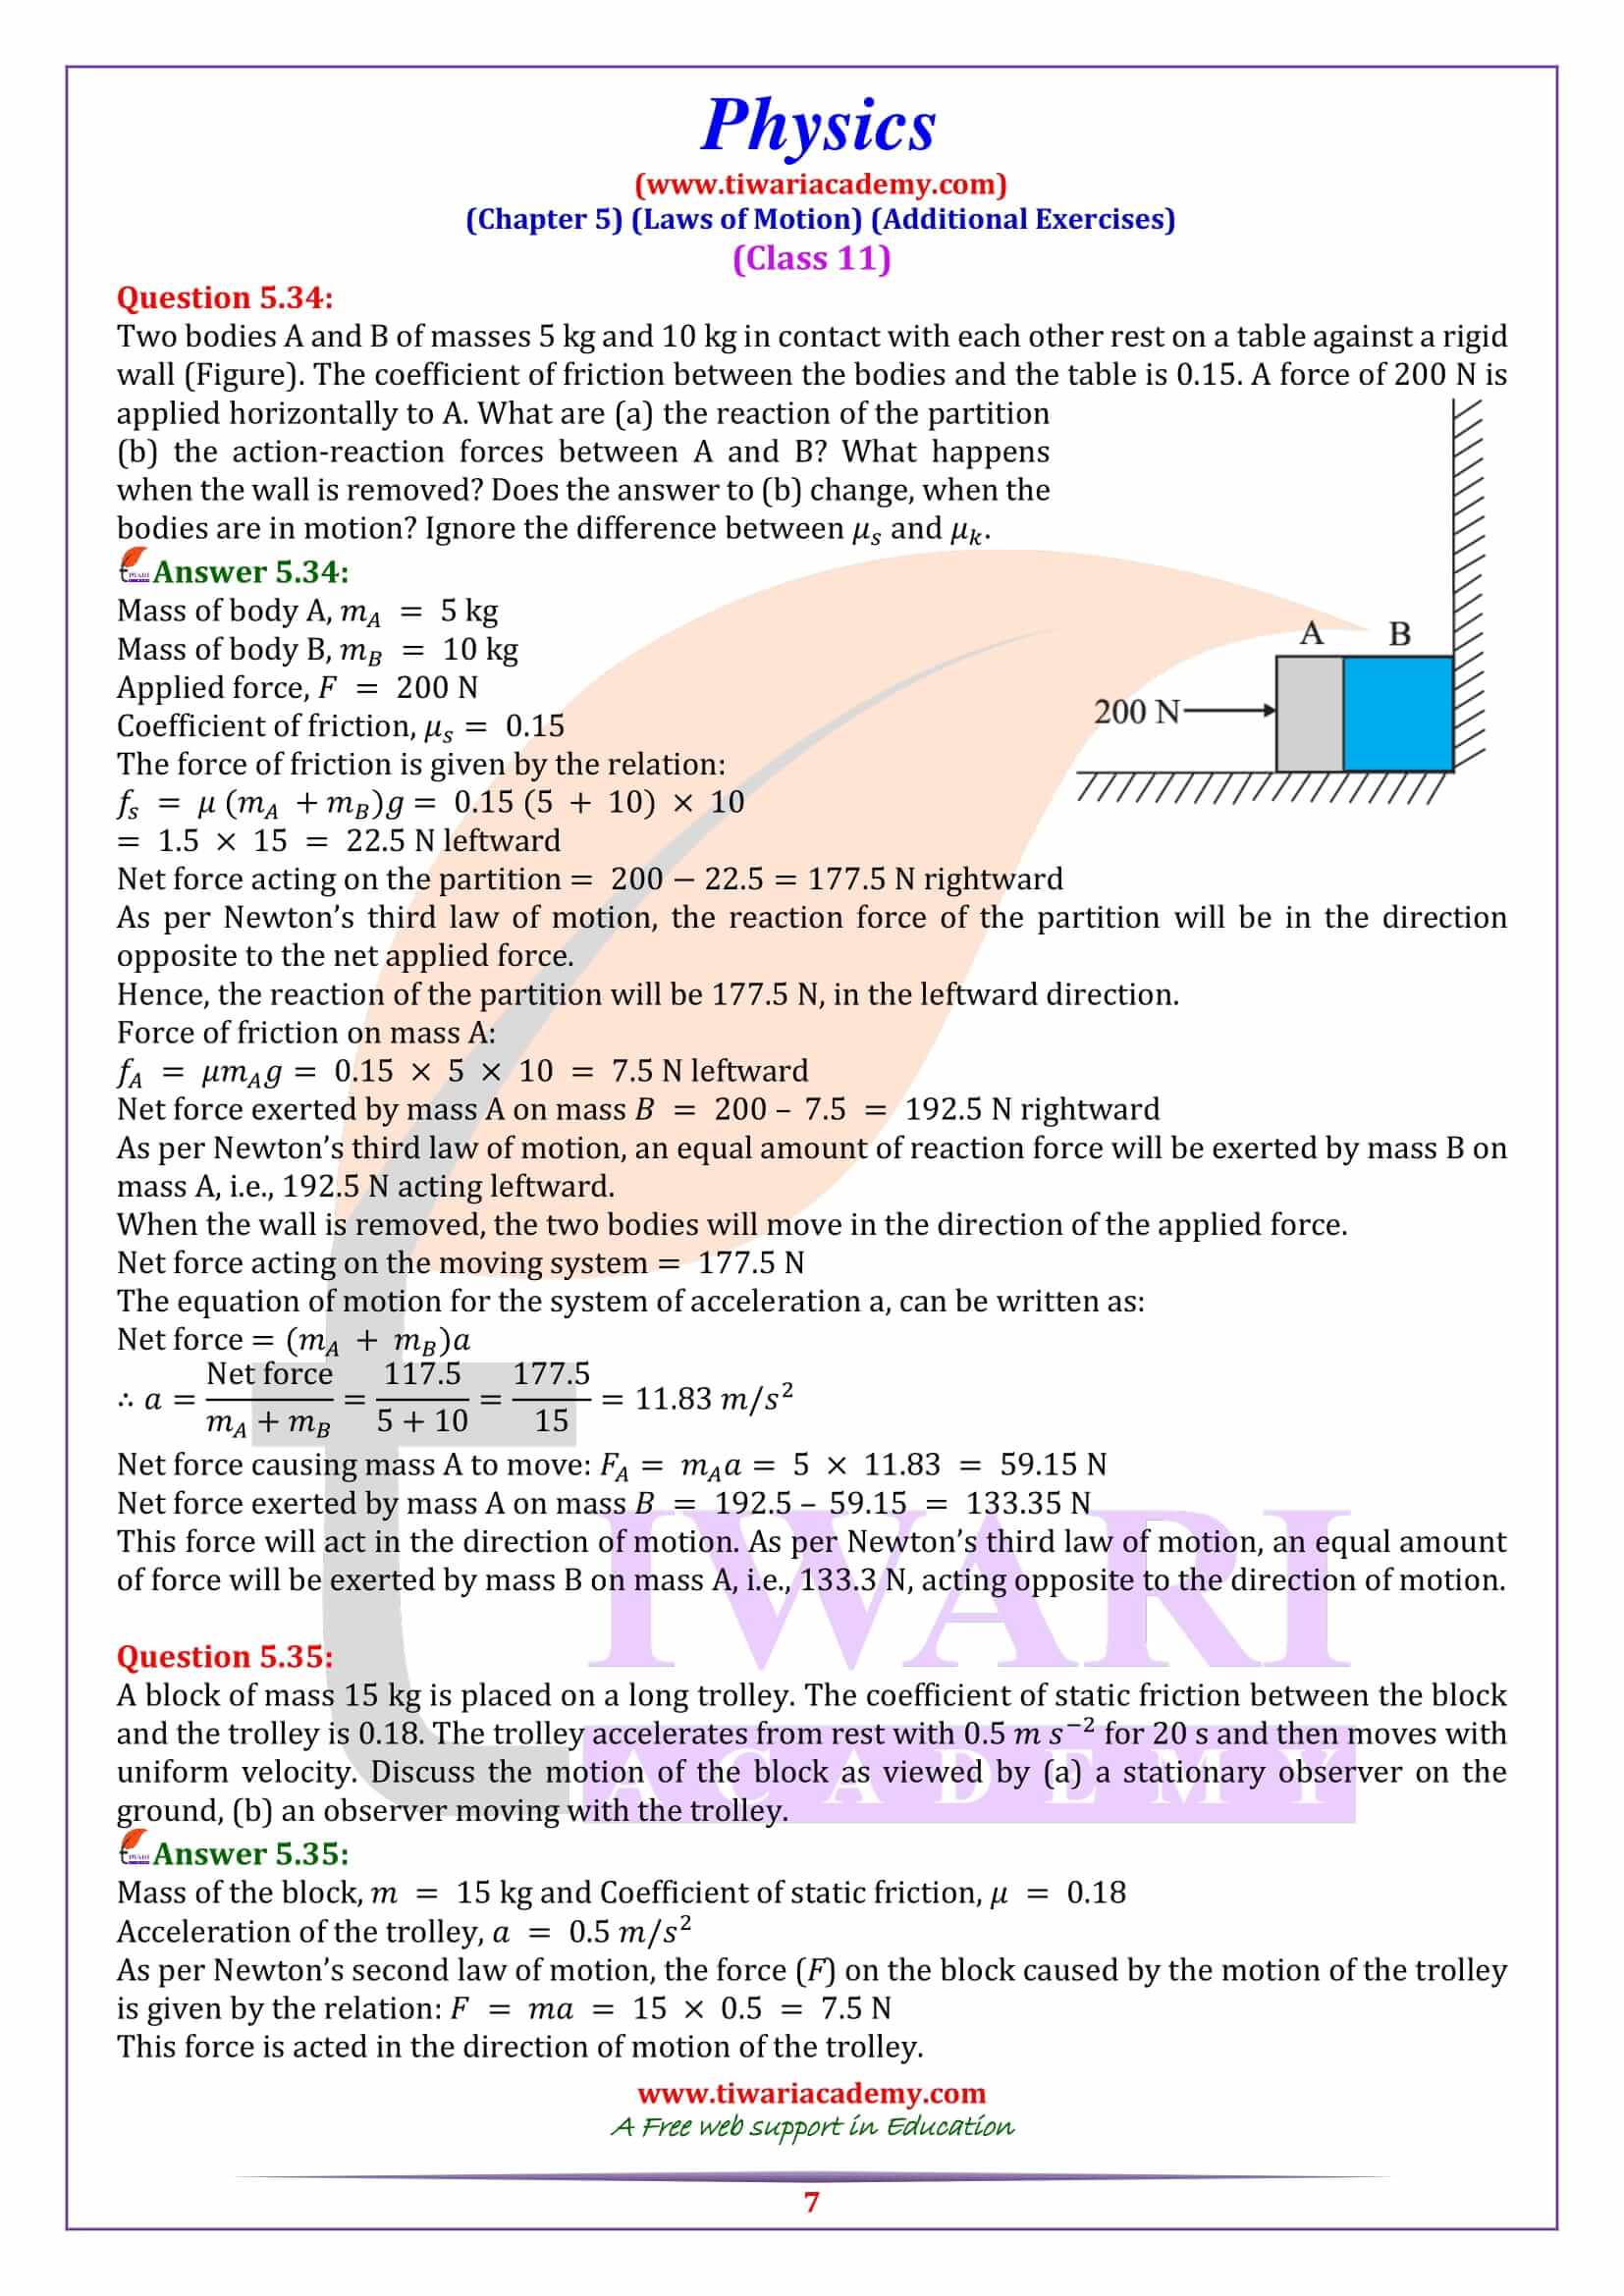 NCERT Solutions for Class 11 Physics Chapter 5 in English Medium